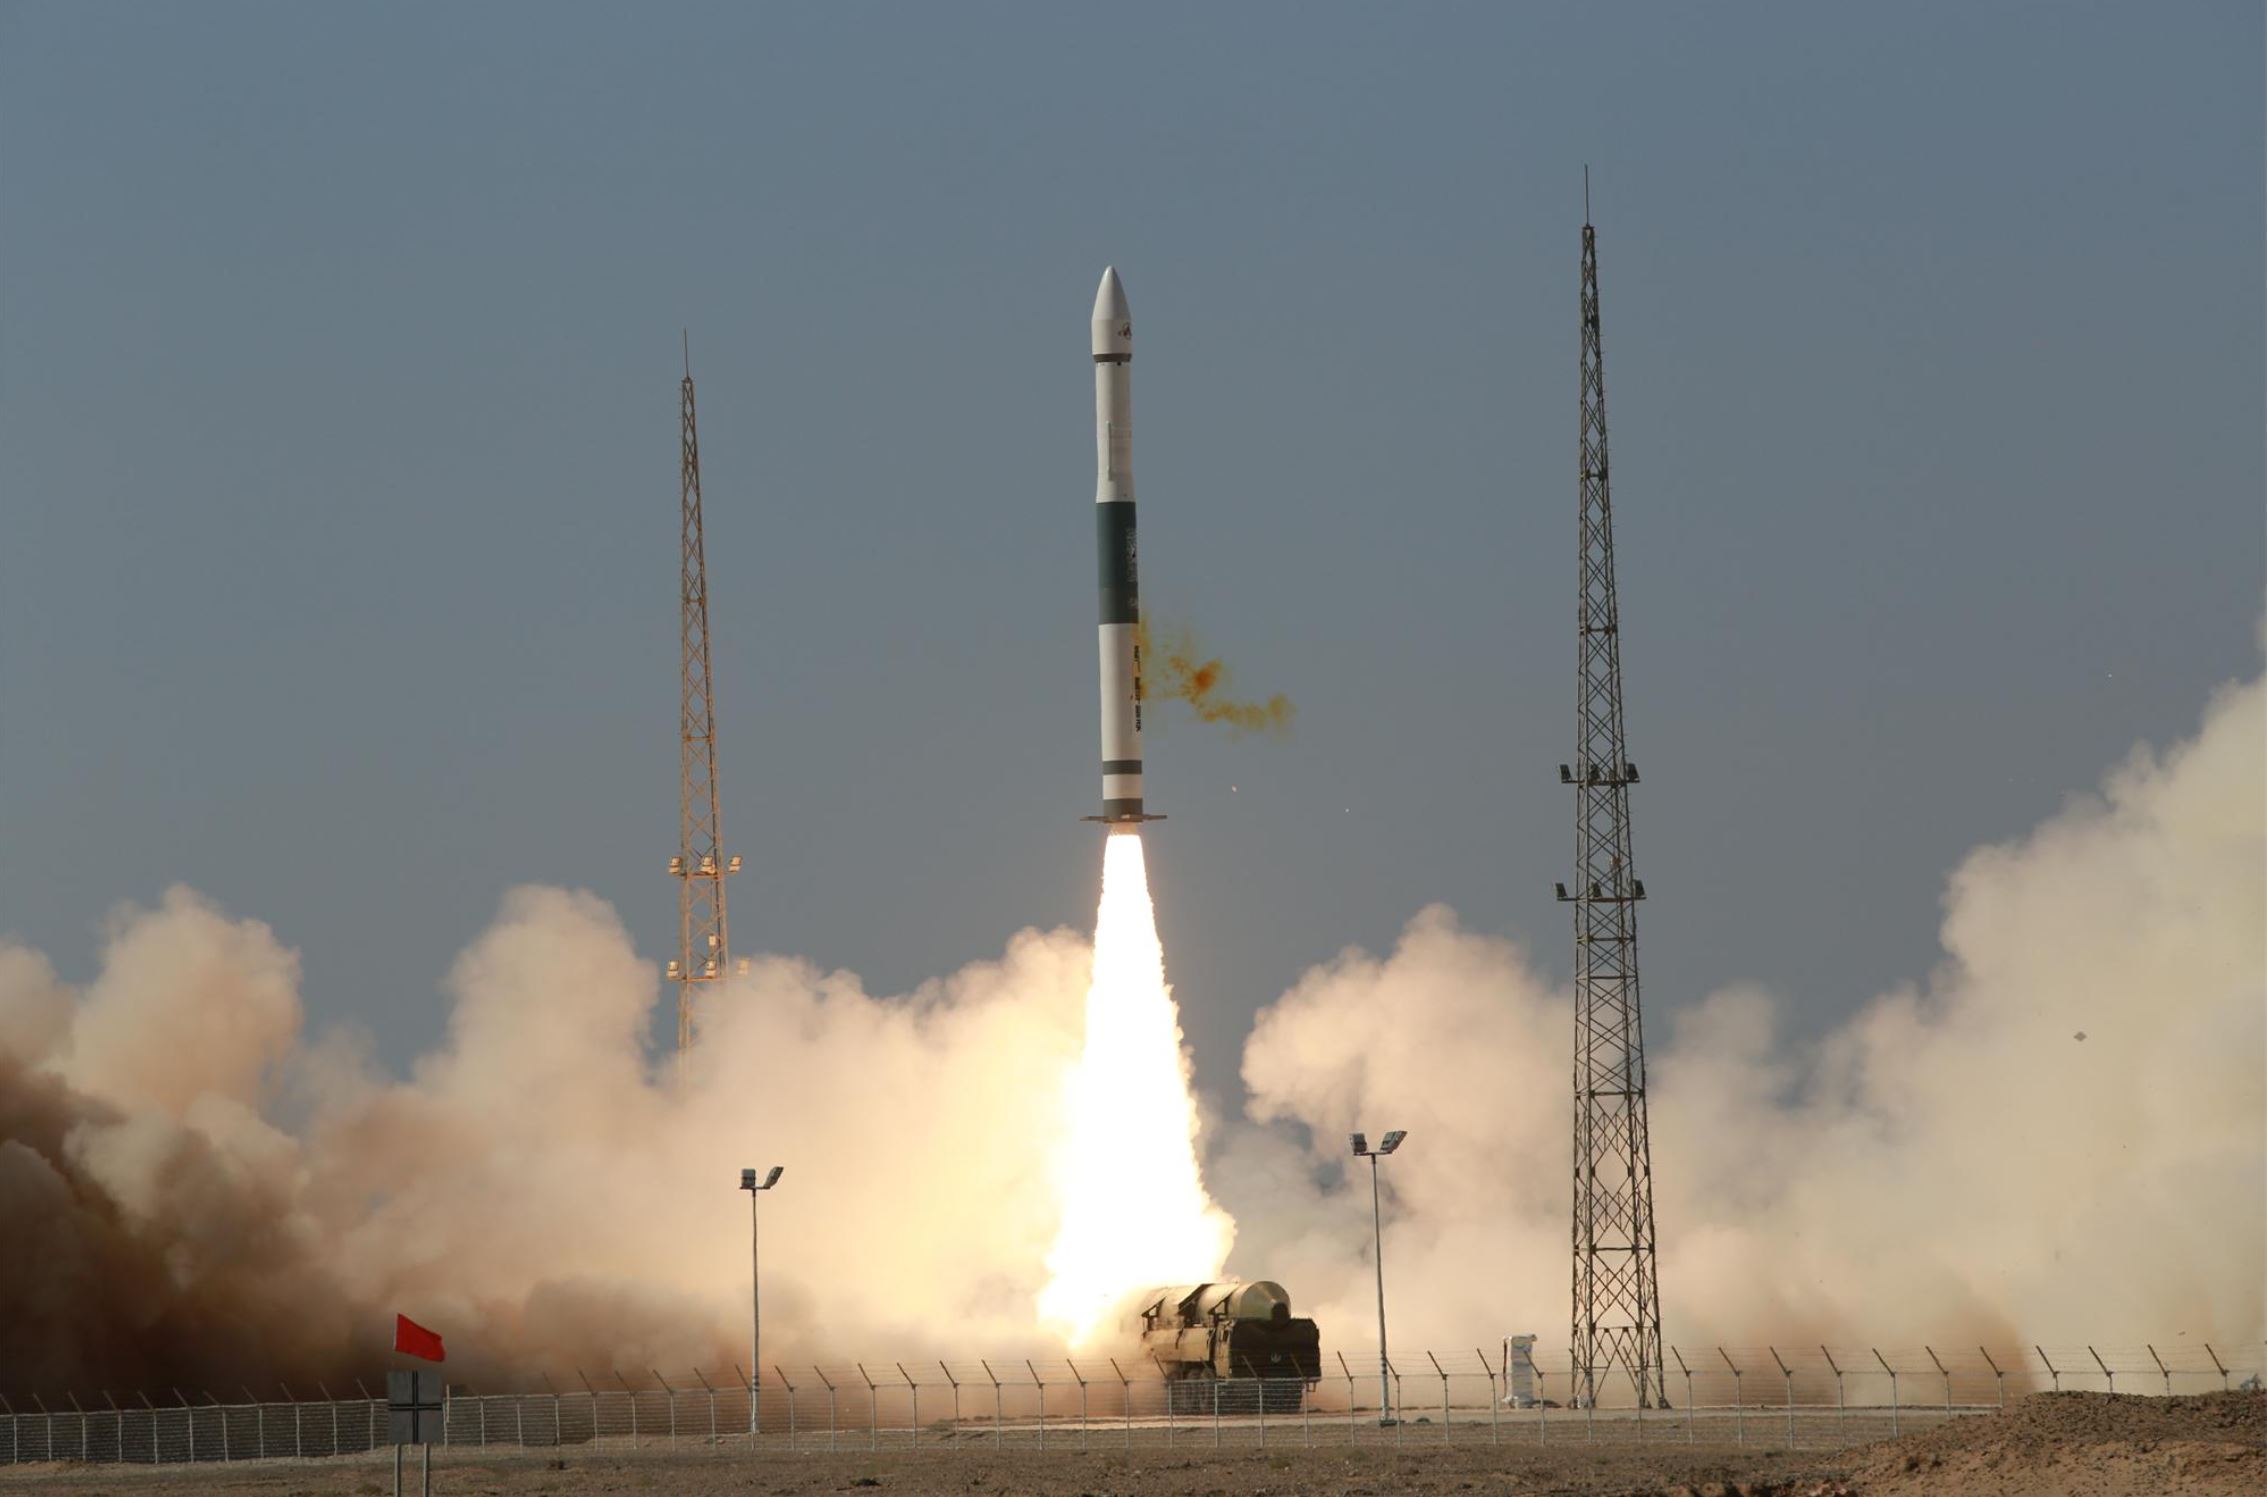 Classified satellite declared lost after China launches twice in 2 hours thumbnail